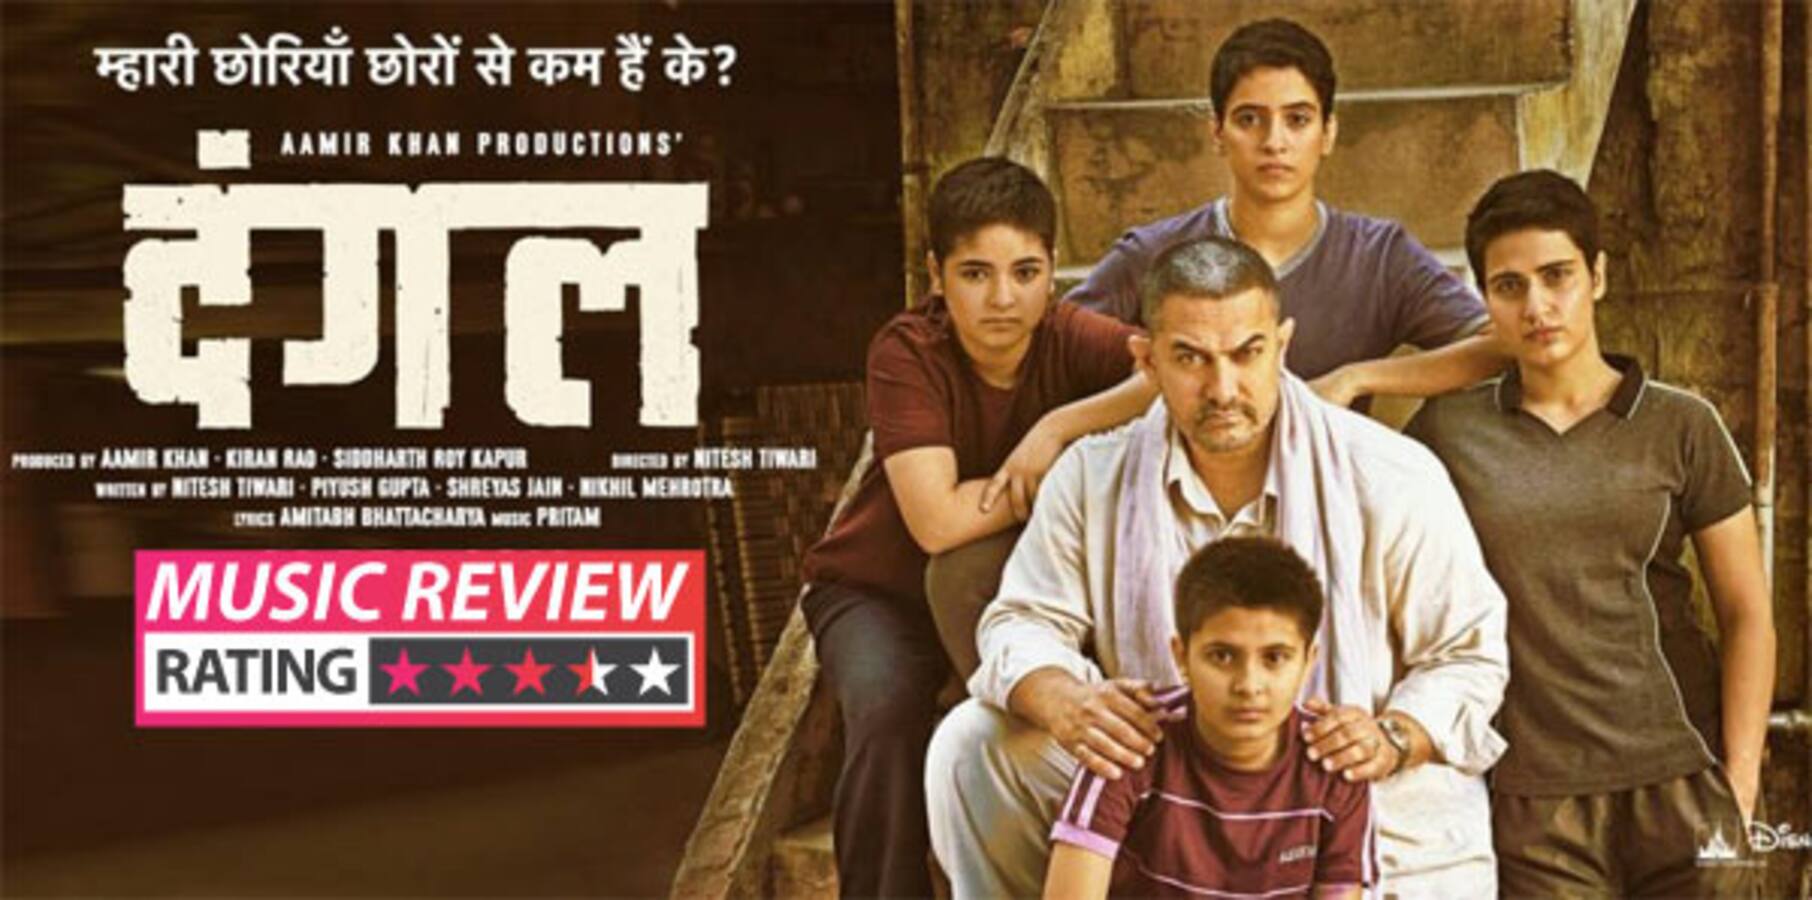 Dangal music review: Pritam works wonders with a rustic soundtrack for  Aamir Khan's wrestling biopic - Bollywood News & Gossip, Movie Reviews,  Trailers & Videos at 